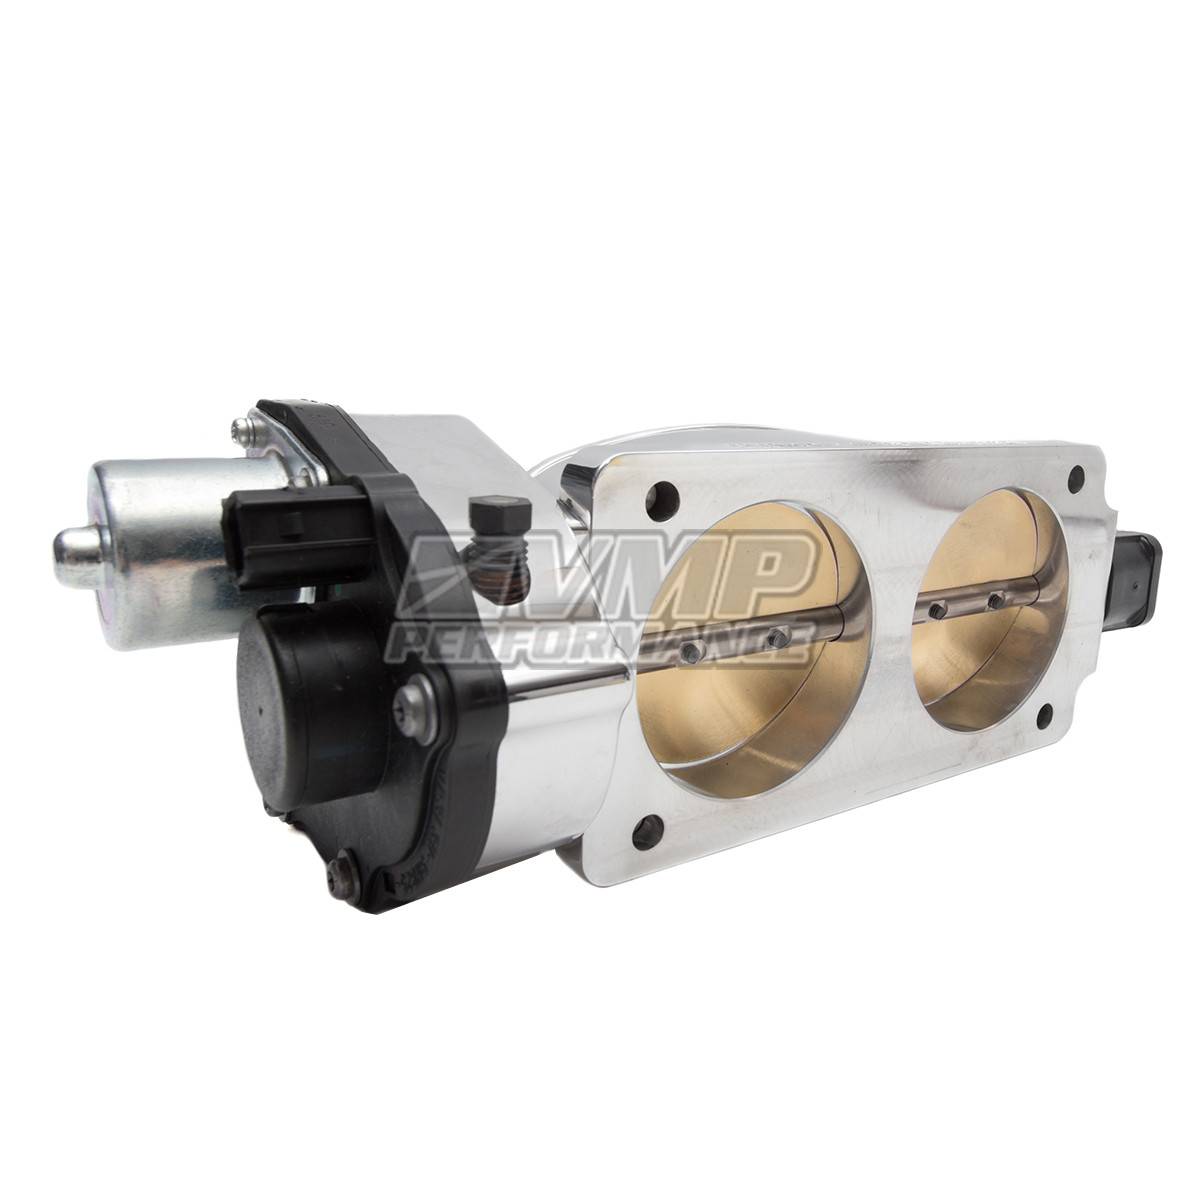 VMP Performance  - VMP Performance 67mm 2007-2014 Shelby GT500 & Supercharged Ford 5.0L Twin-Jet Throttle Body - Image 1